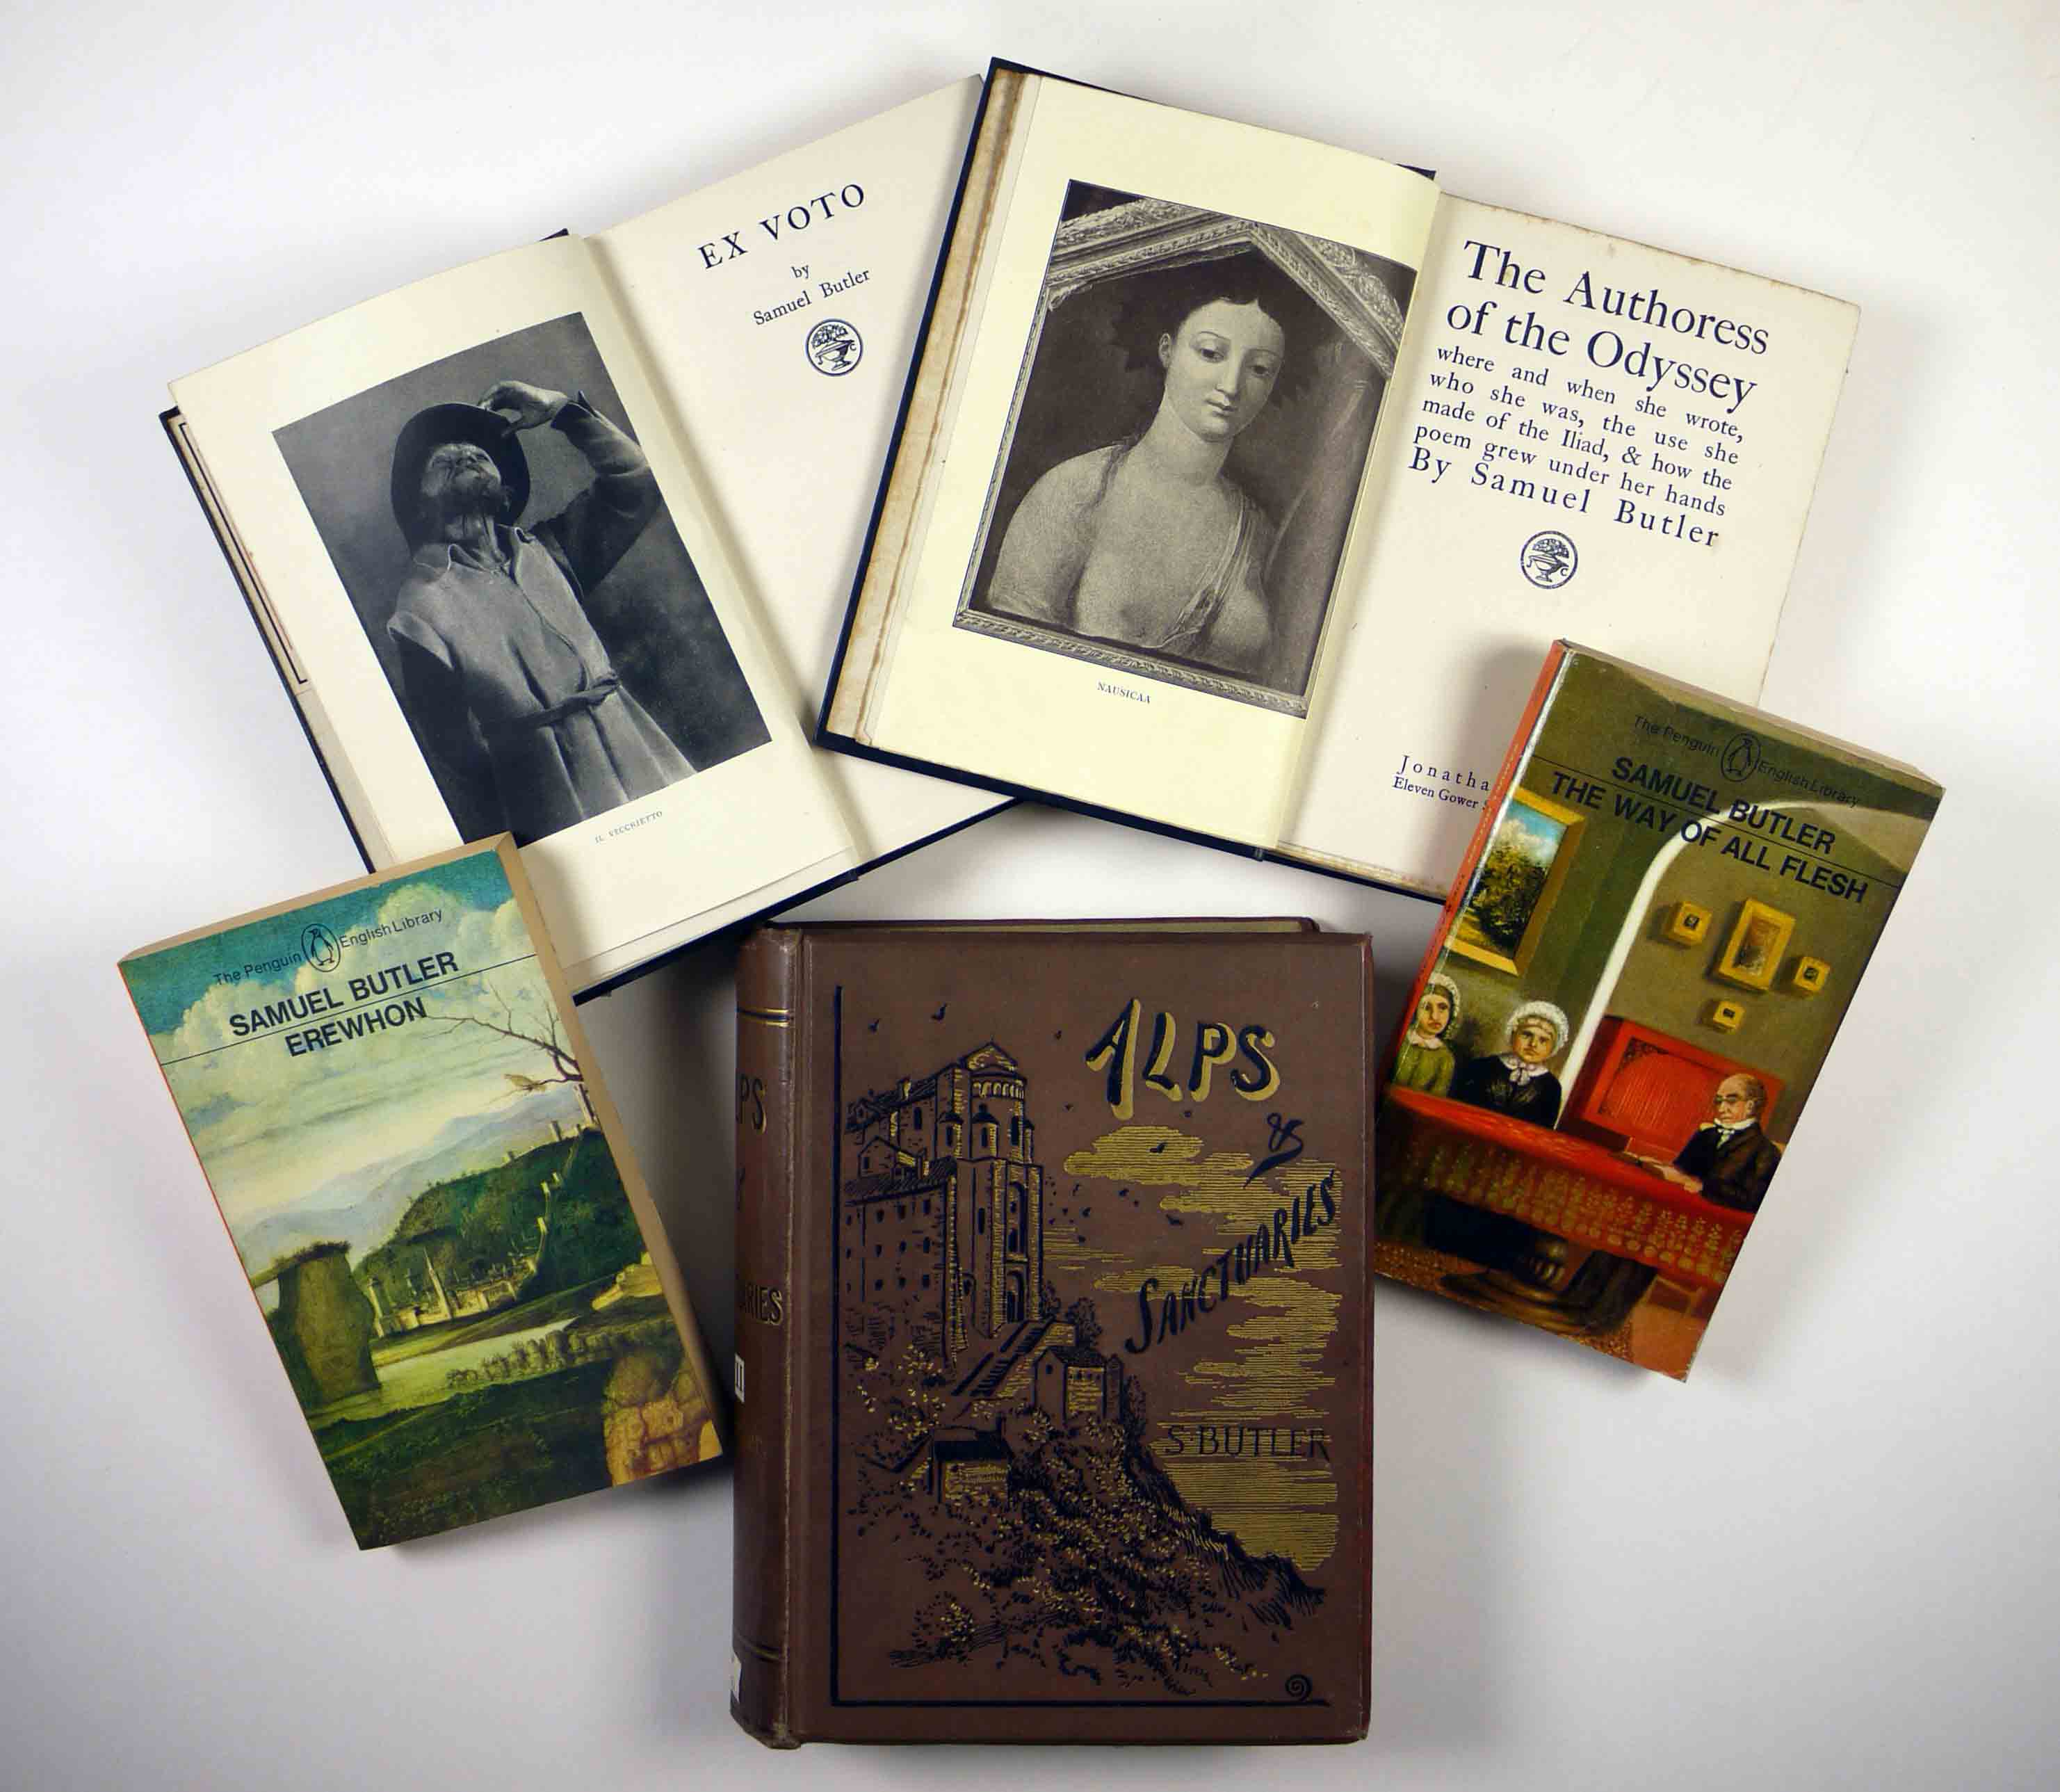 A display of some of Butler's published works